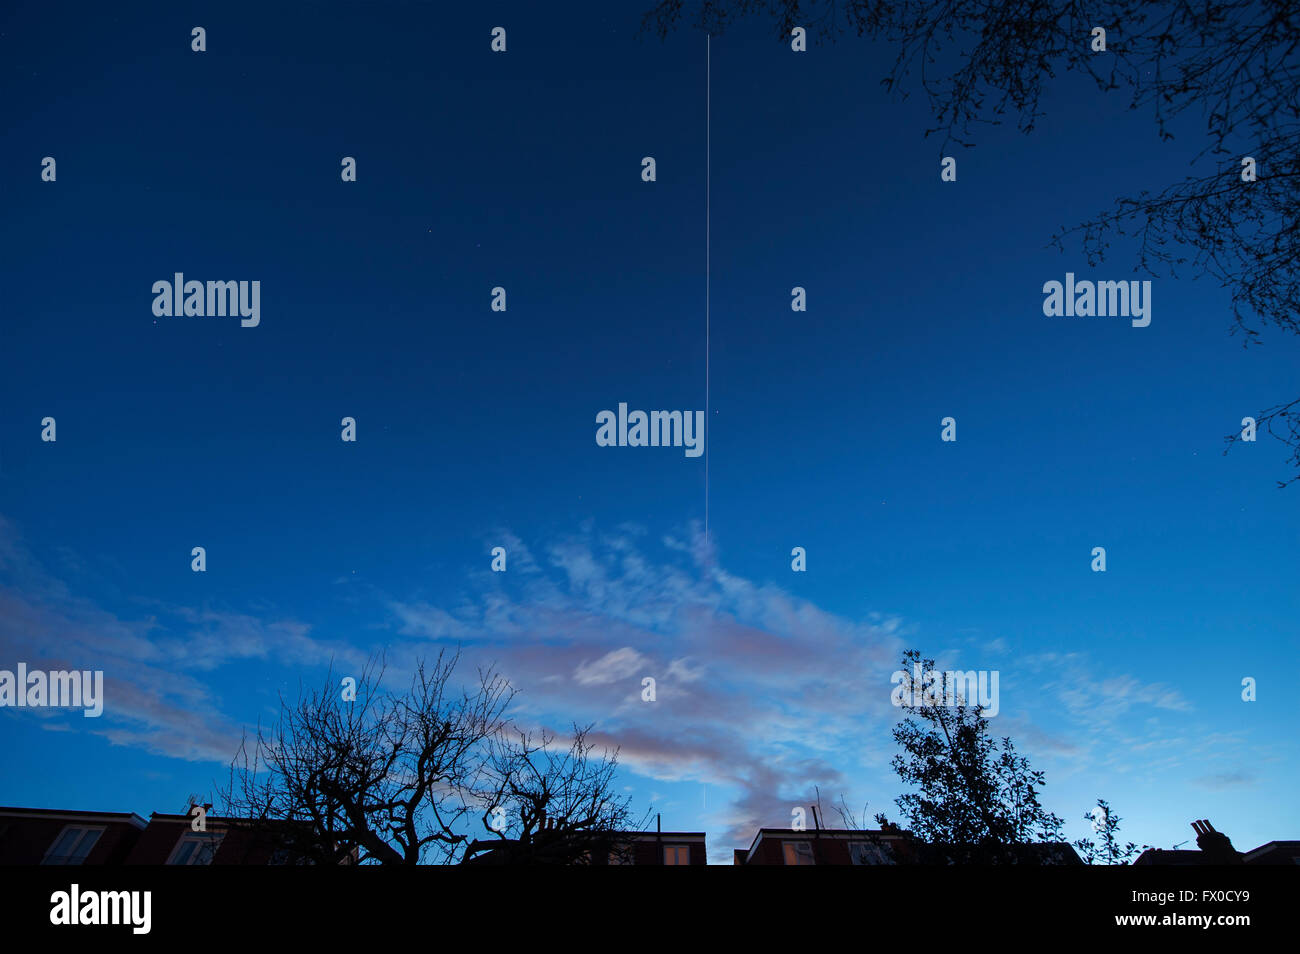 Wimbledon, London, UK. 9th April, 2016. The International Space Station tracks across the sky above London from W to E at 8:40pm at a speed of approx. 17,000mph, shining brightly in late evening skies from reflected sunlight before entering Earth’s shadow. Credit: Malcolm Park/Alamy Live News. Stock Photo